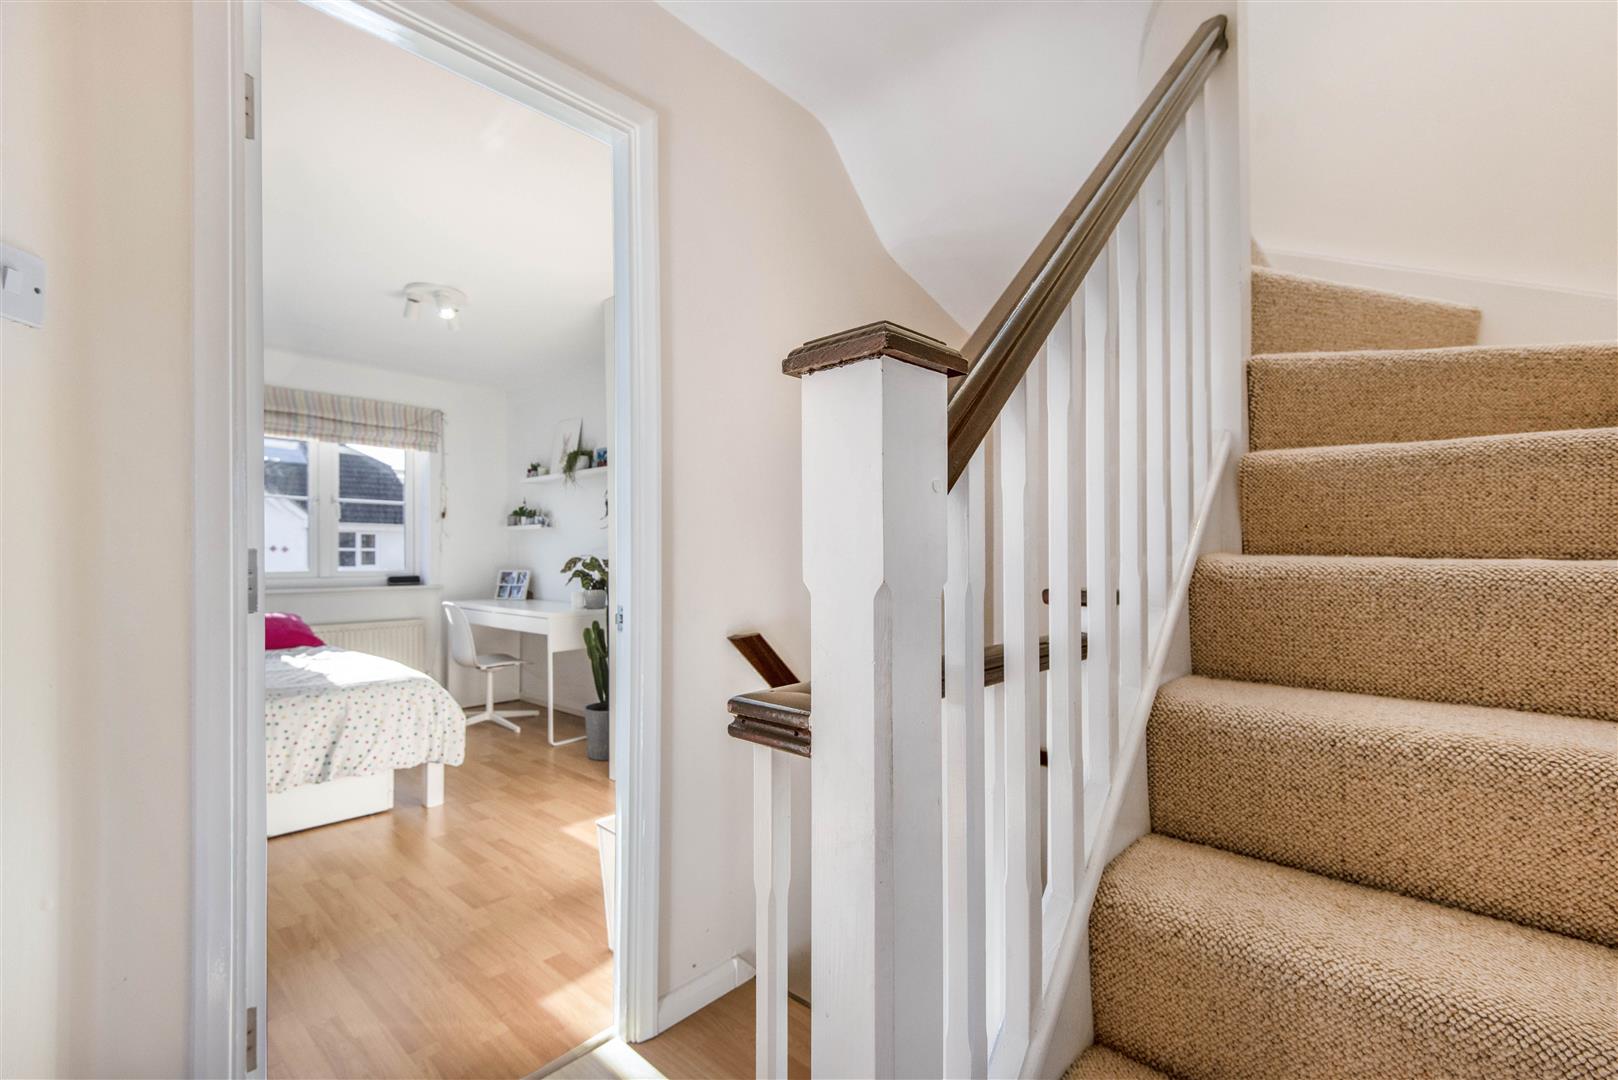 Denbeigh Place Reading house for sale in Reading